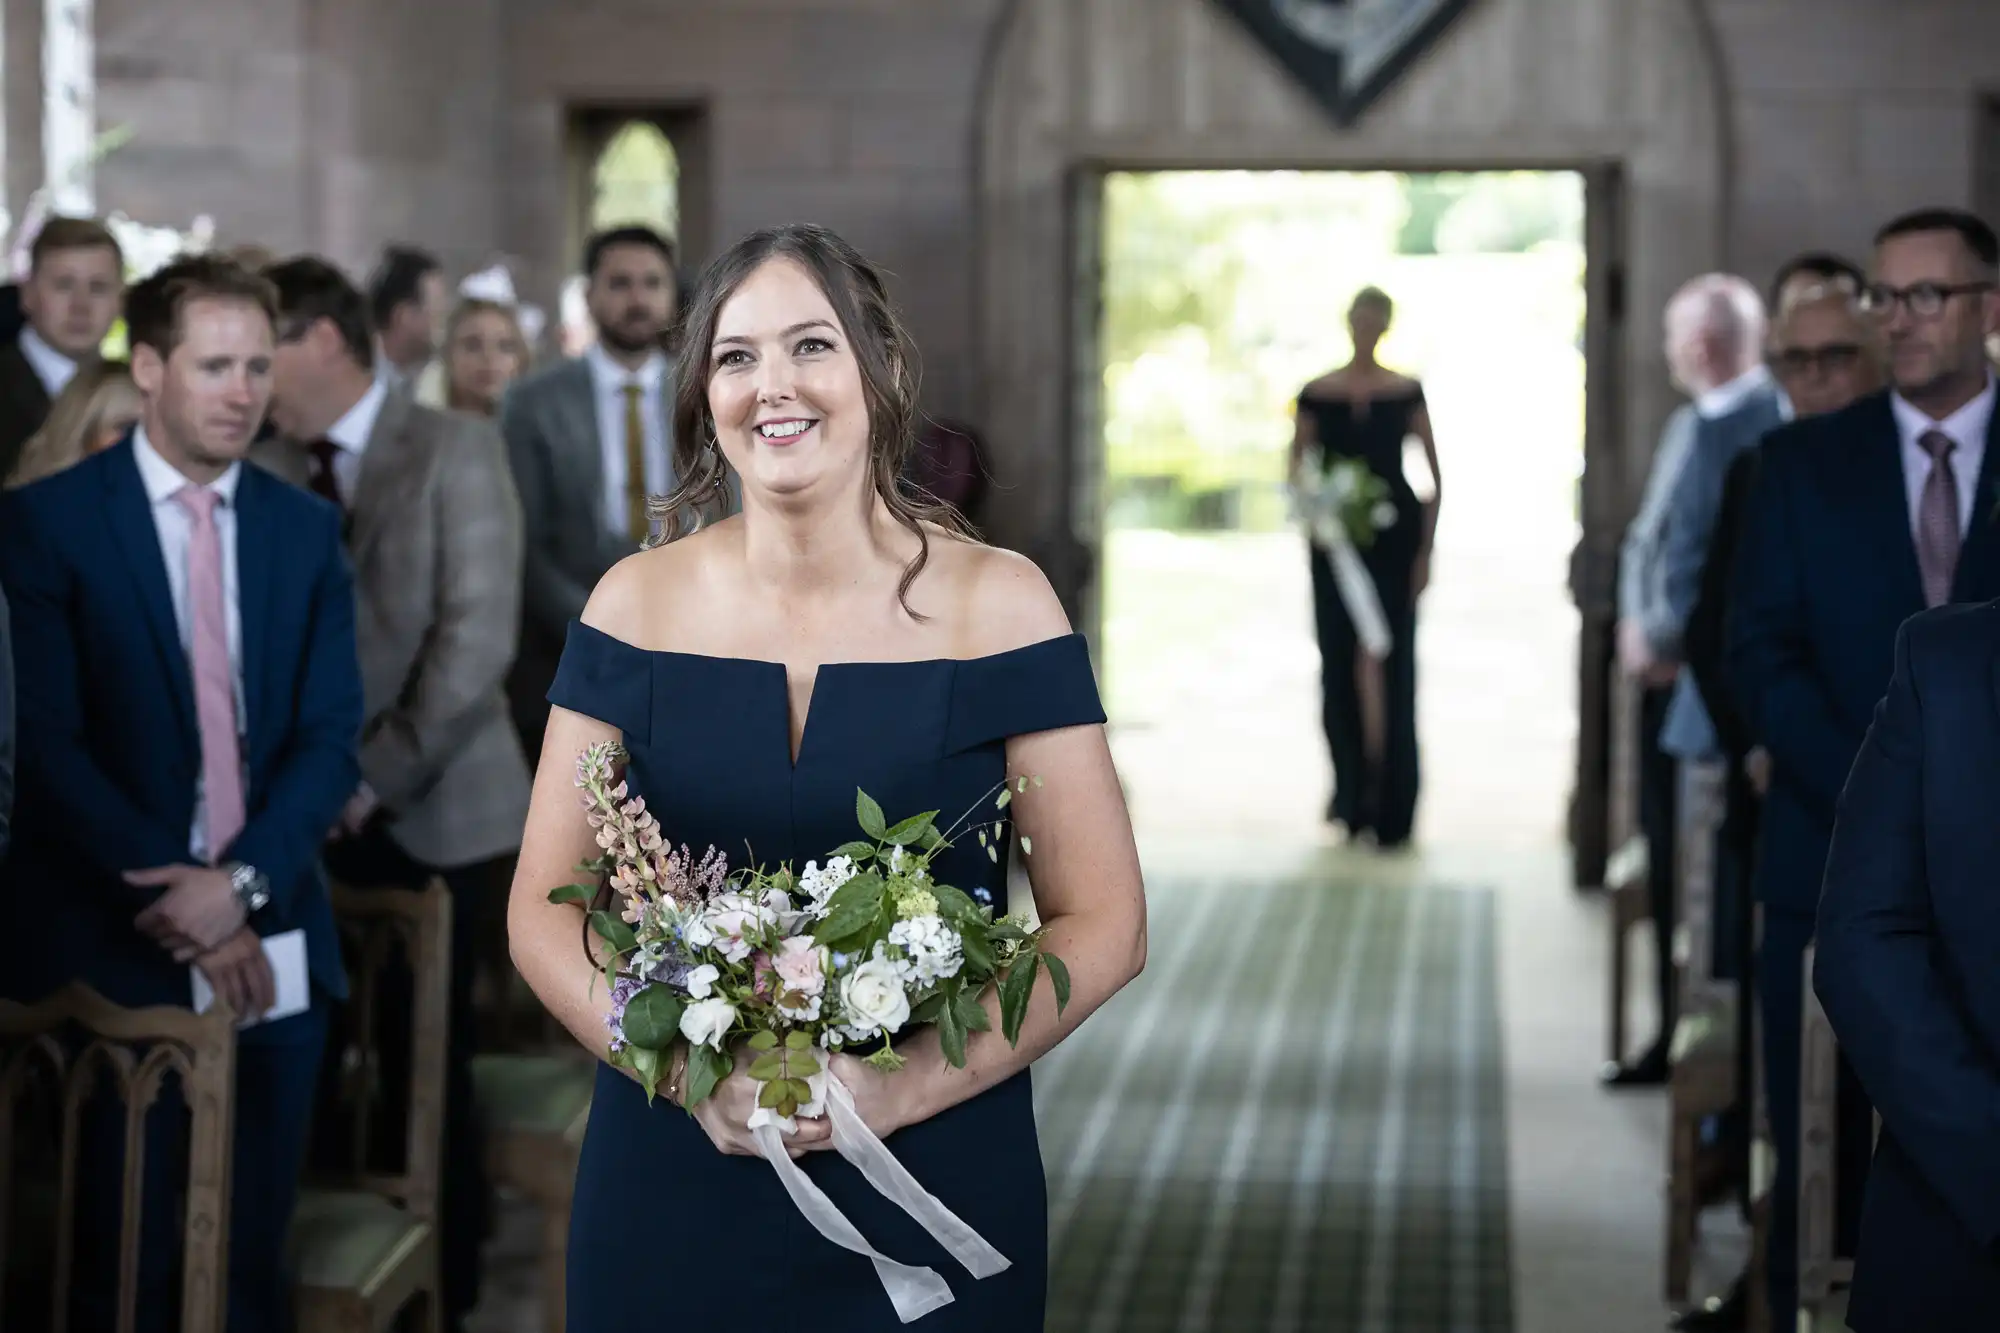 A bridesmaid in a navy dress holds a bouquet, smiling as she walks down the aisle in a church, guests watching.